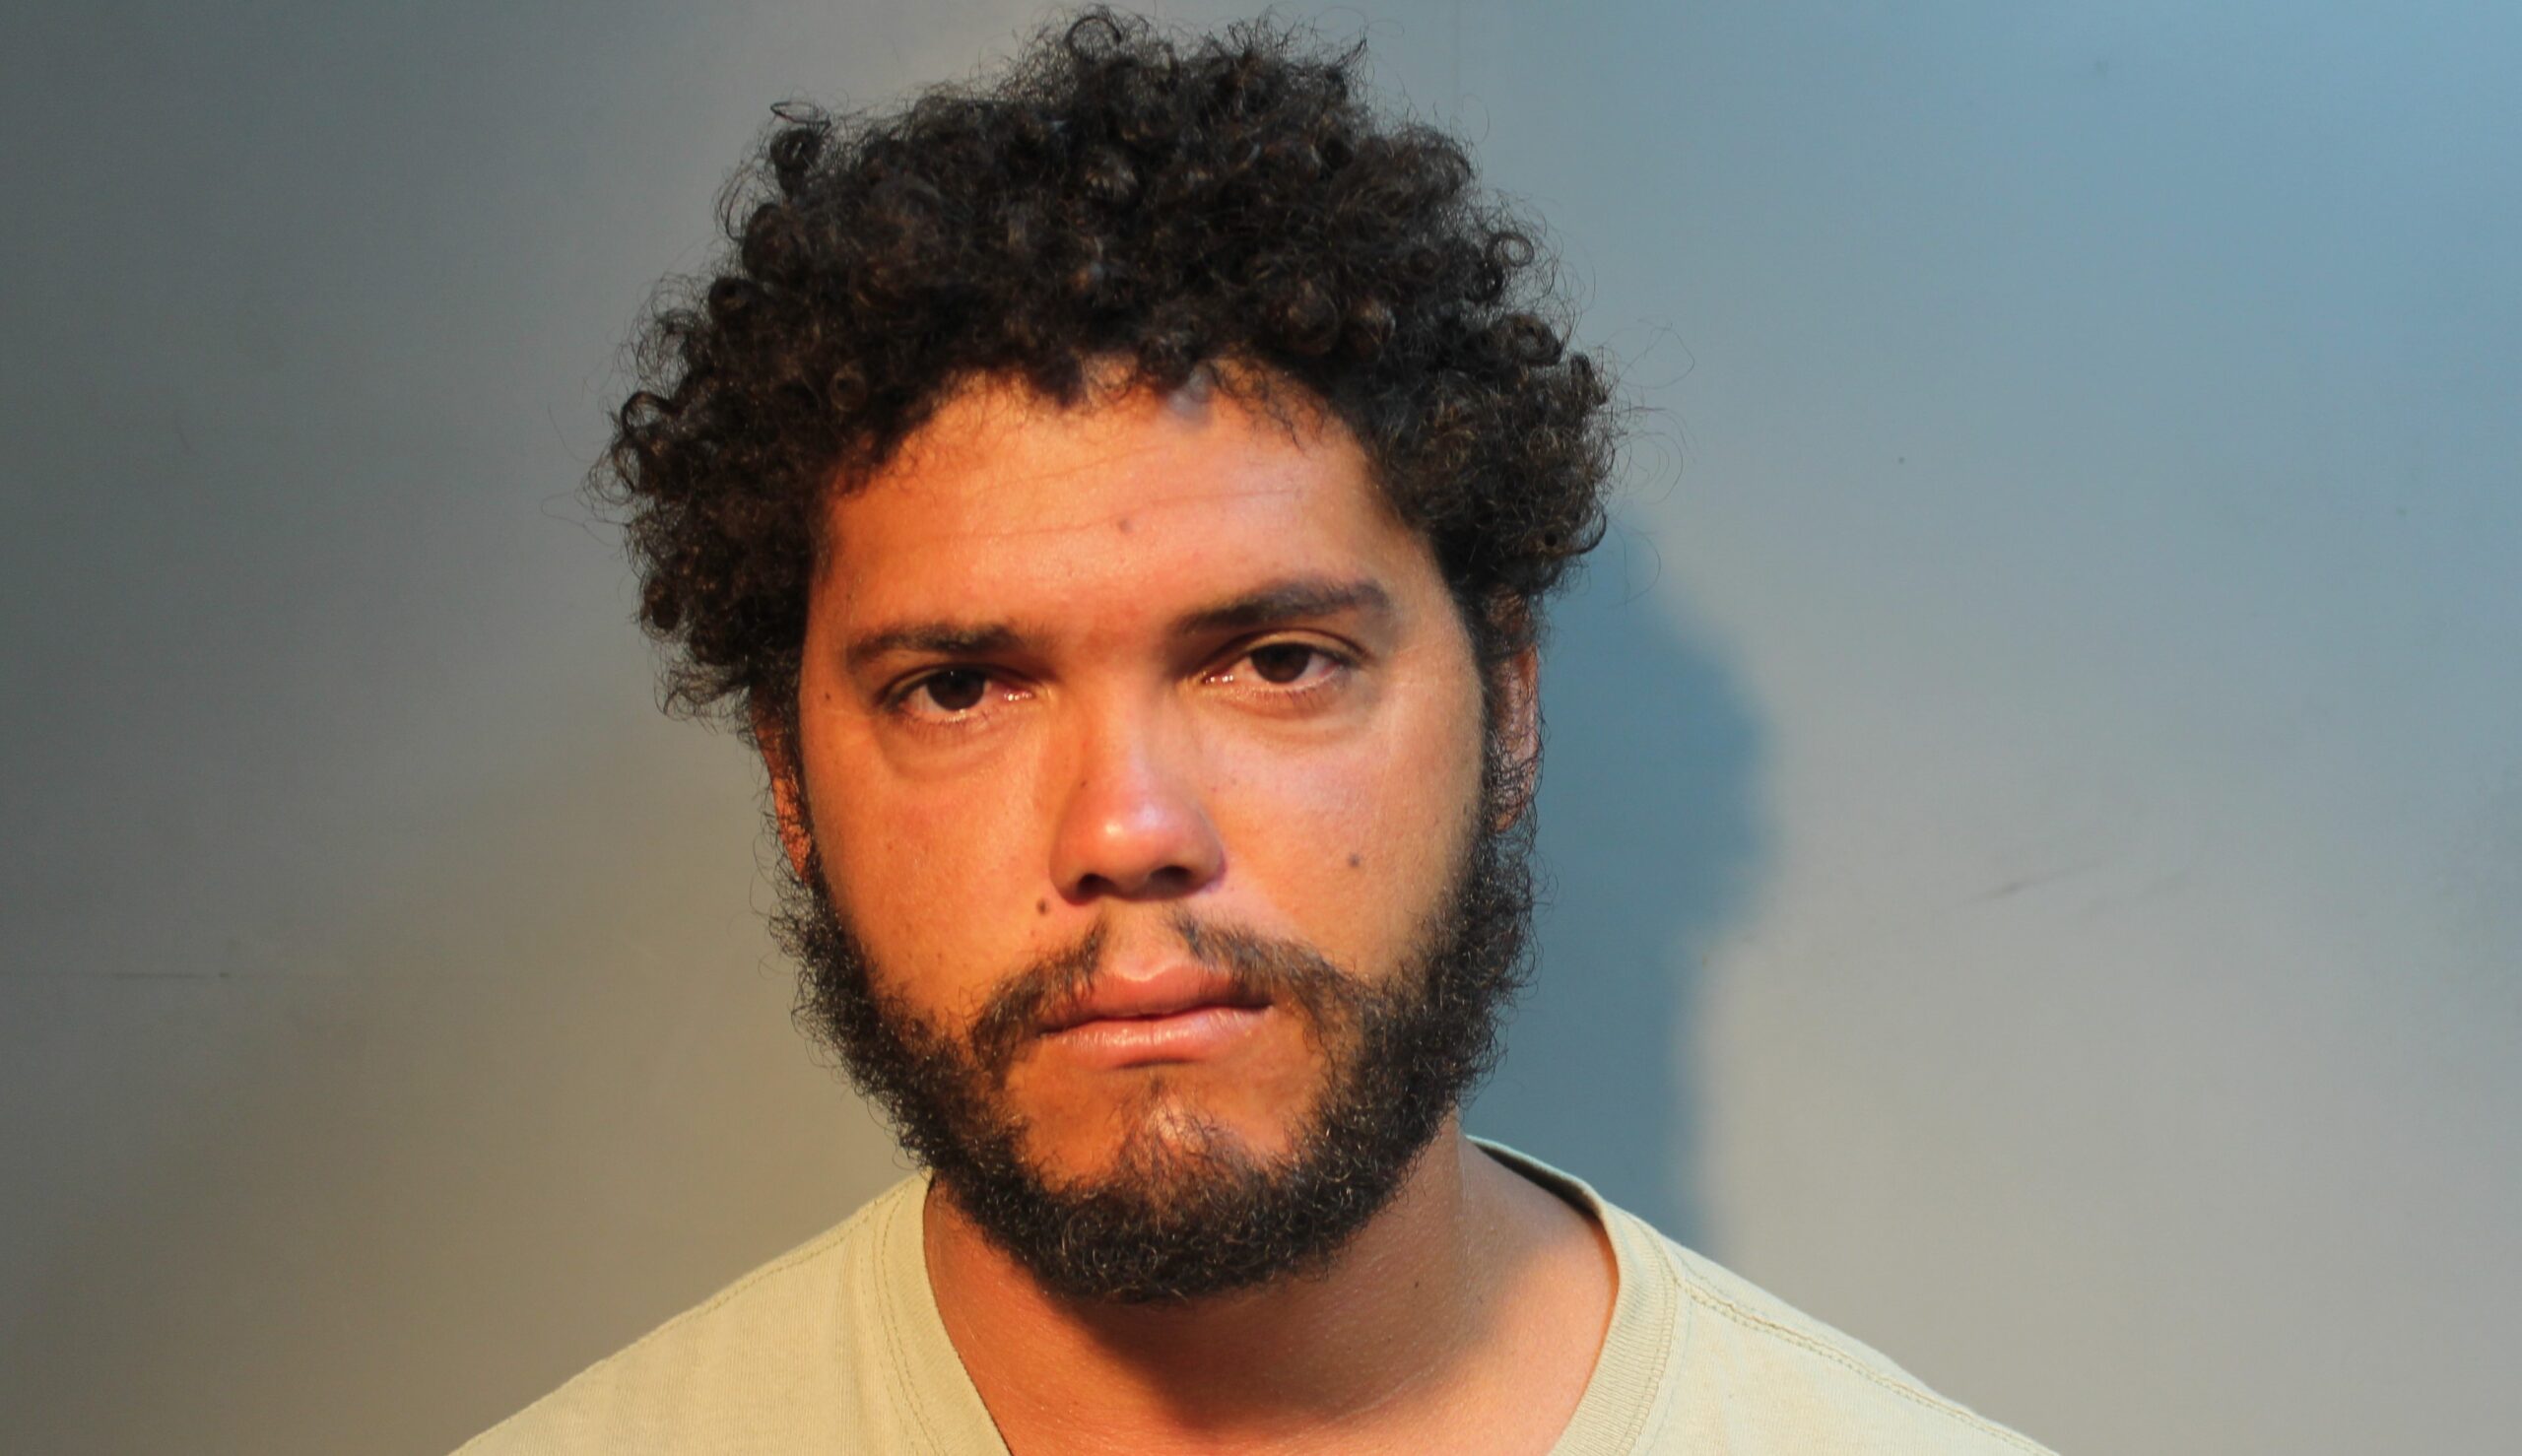 St. Croix Man Who Offered Woman A Ride Home Arrested For Rape: VIPD